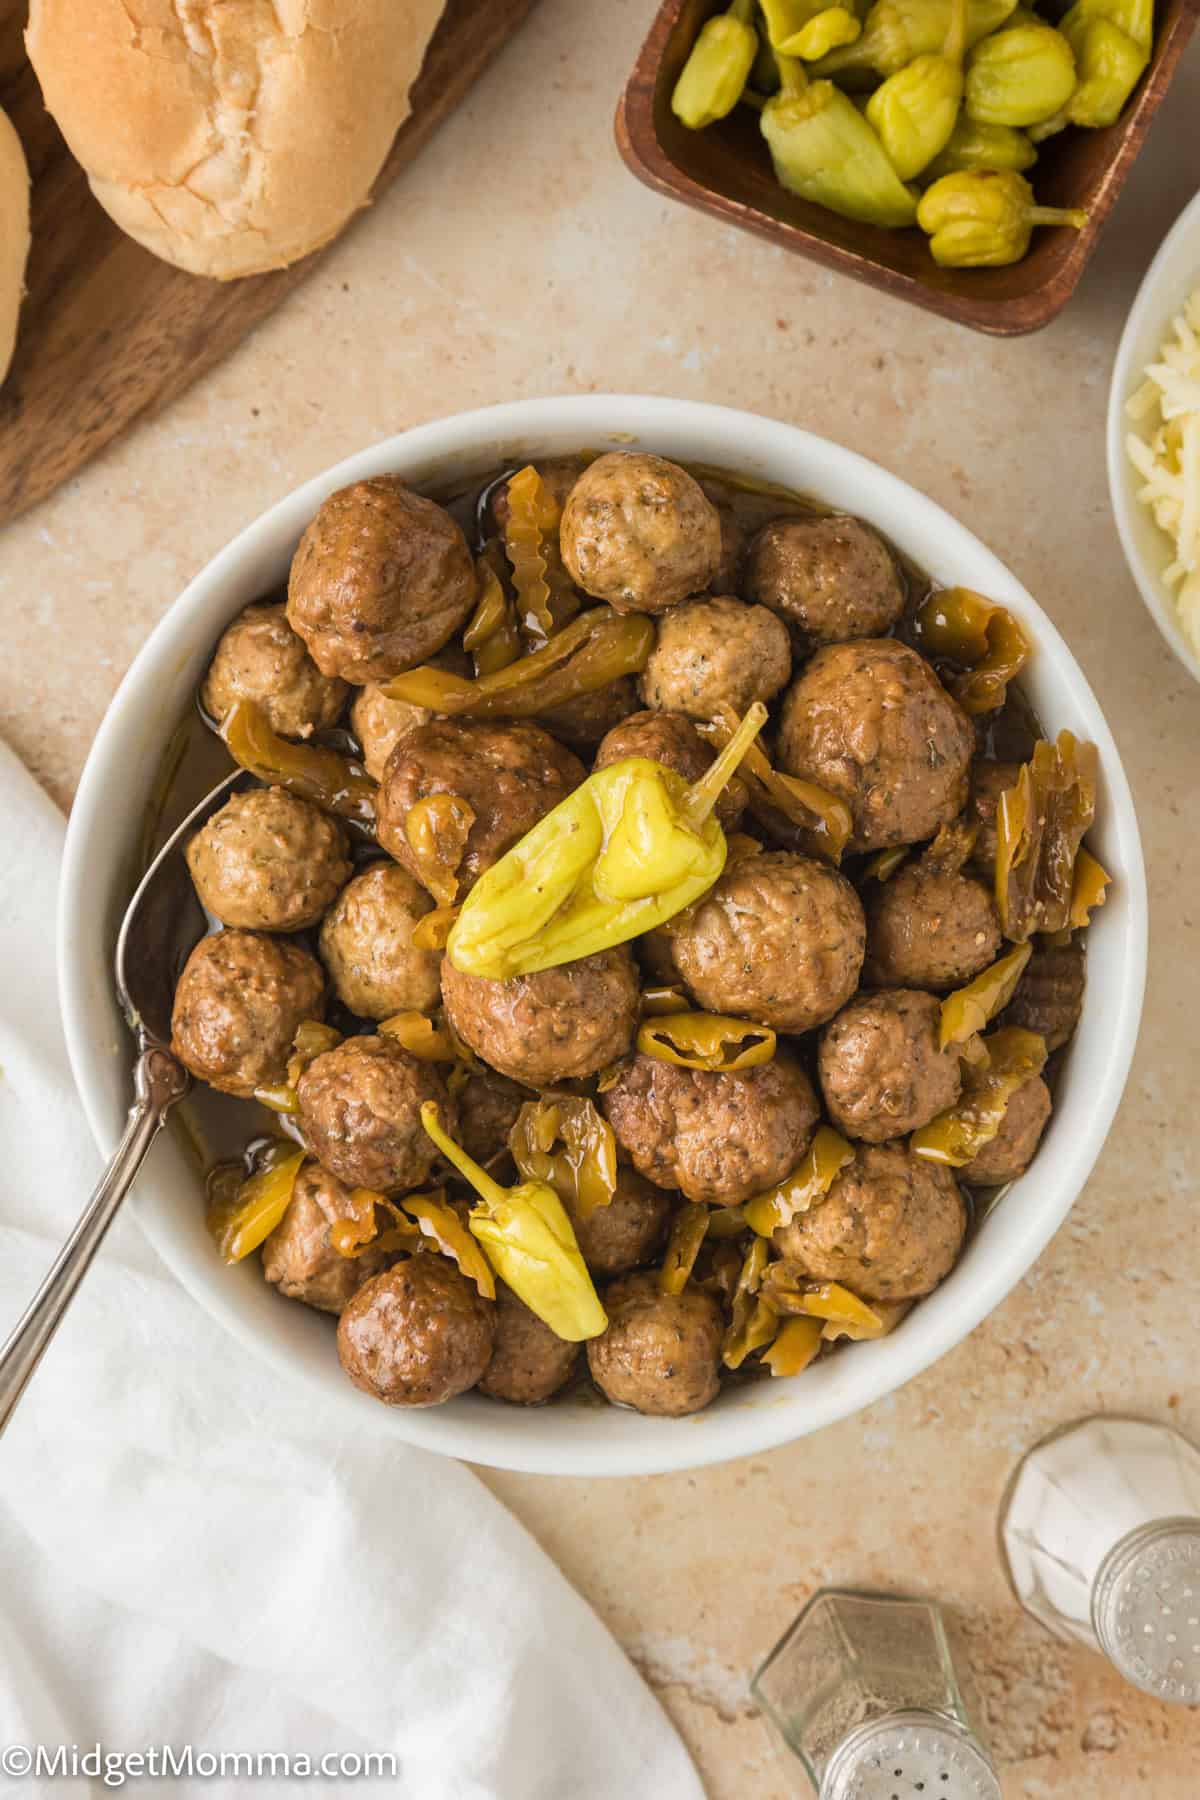 A bowl filled with meatballs and pepperoncini peppers, serving utensils, and a roll of bread beside it.